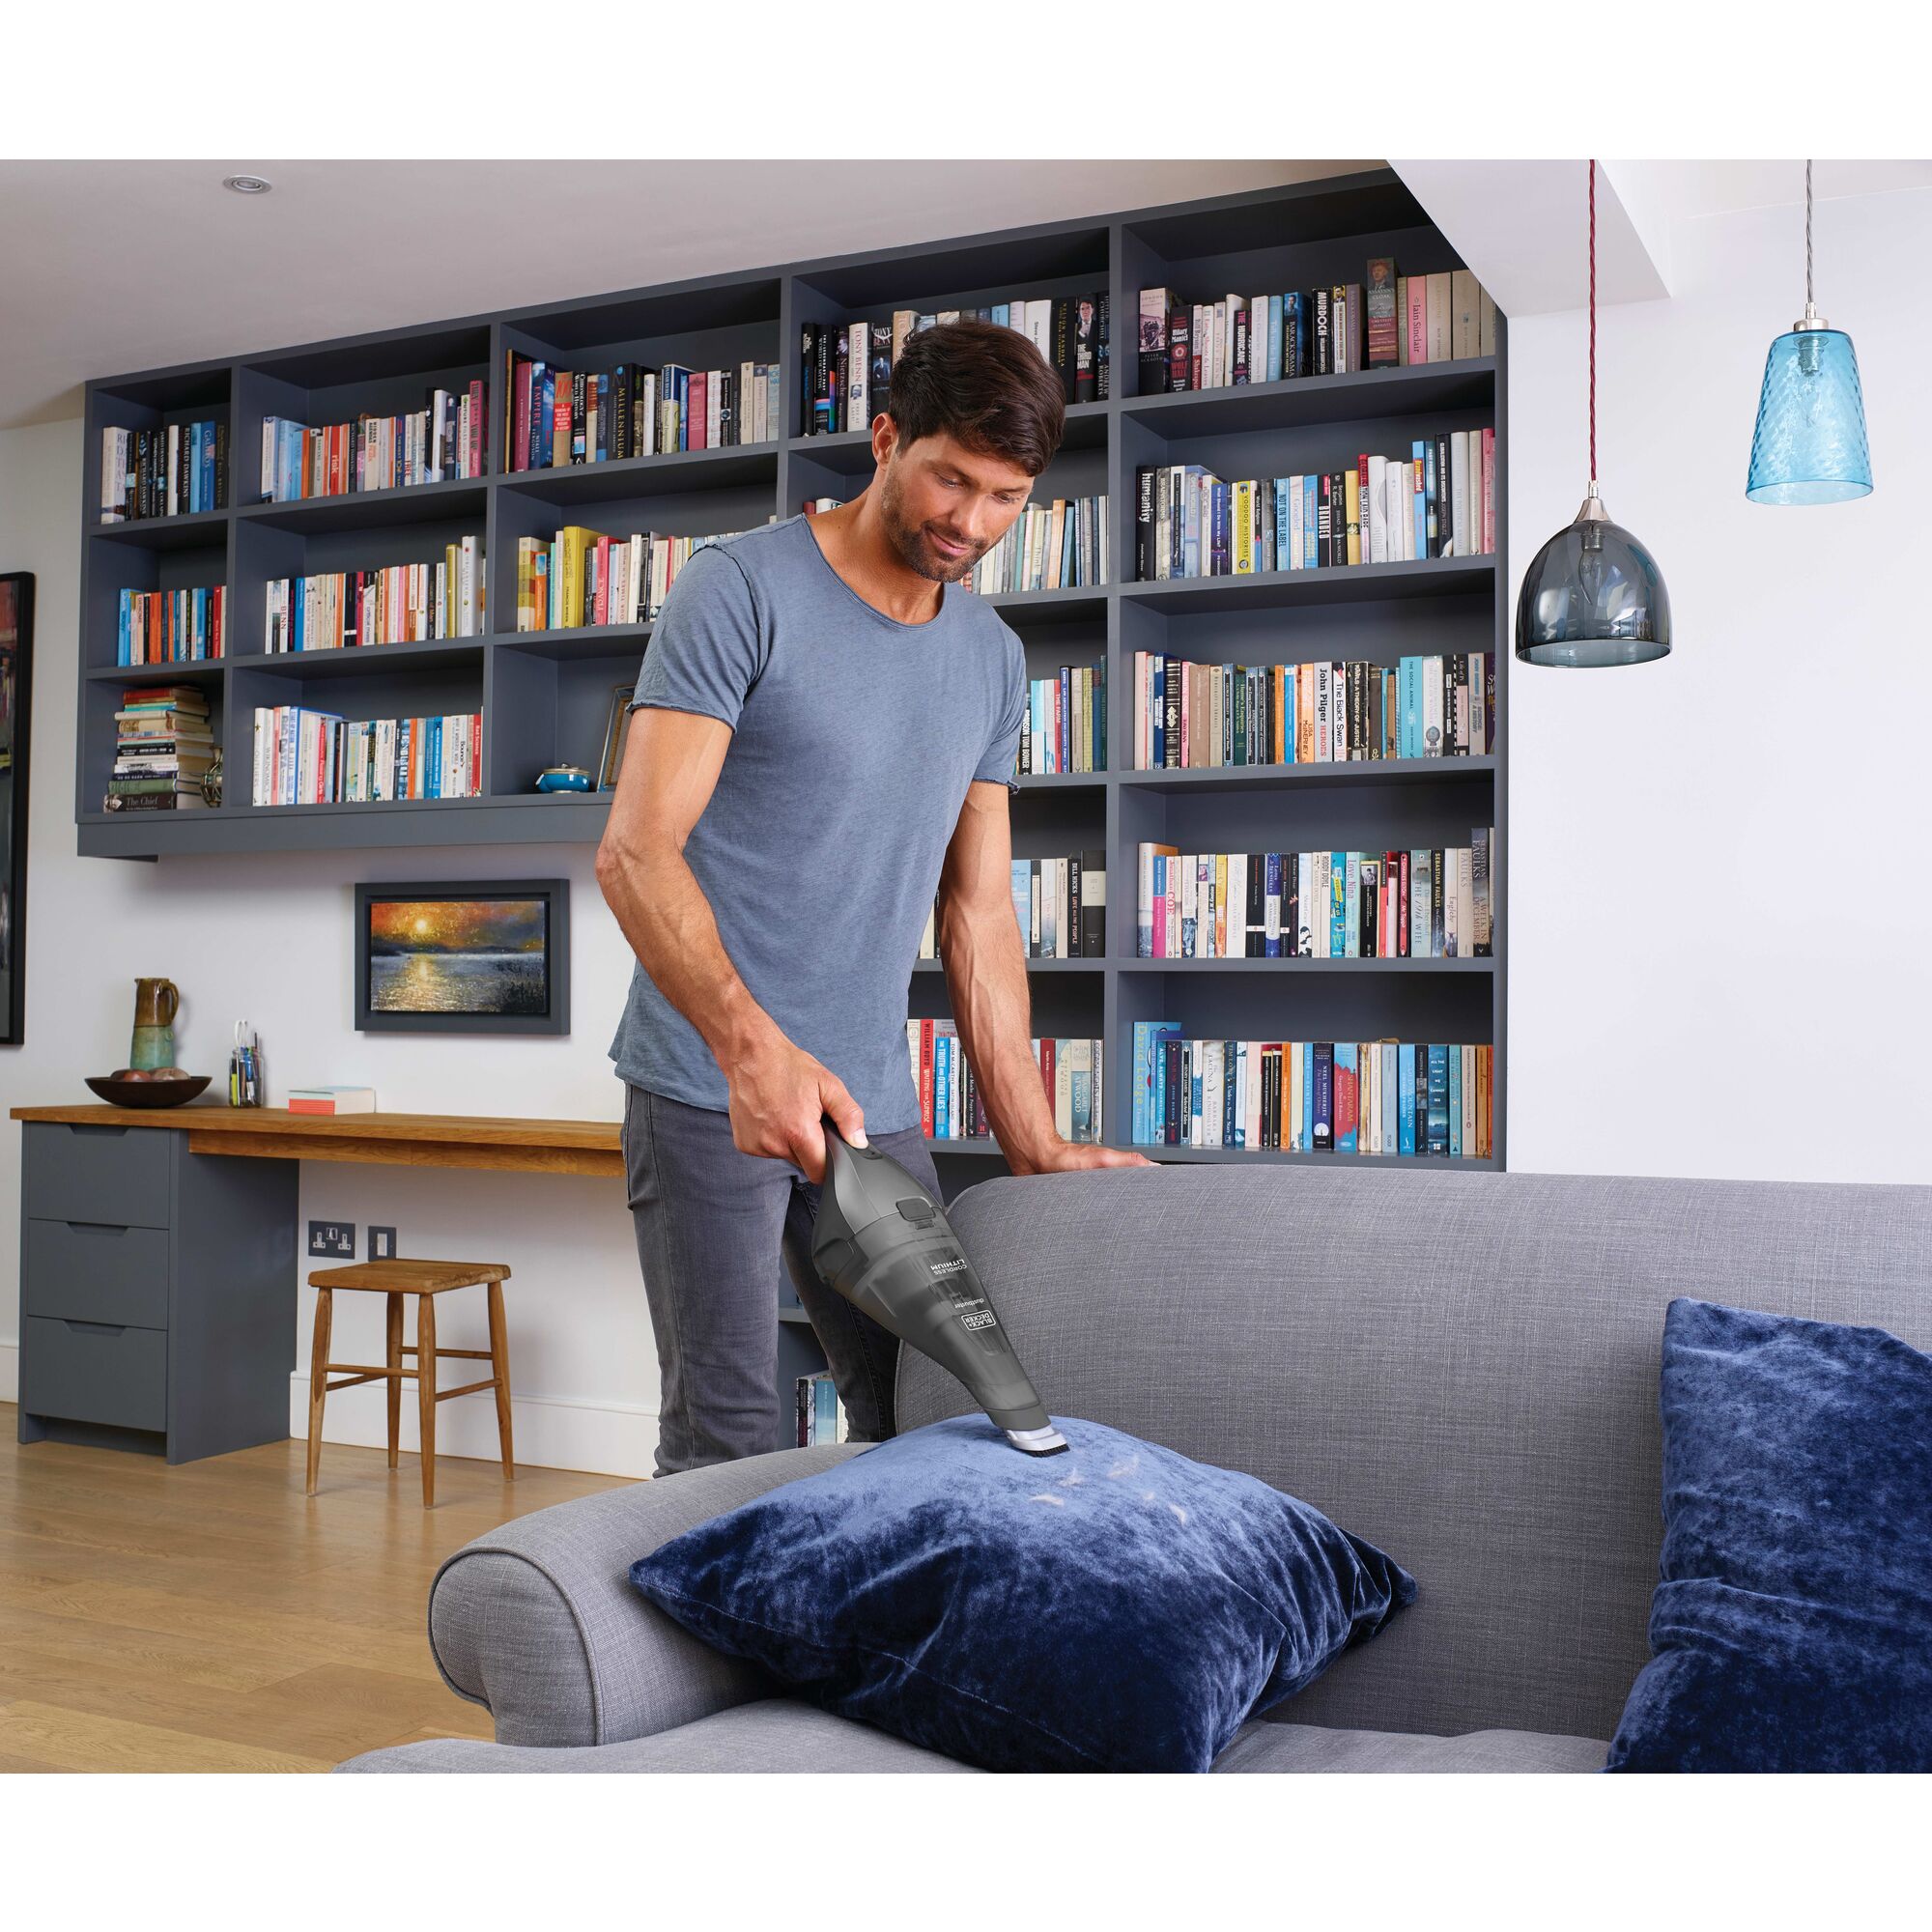 Man cleaning sofa cushion with dustbuster handheld vacuum